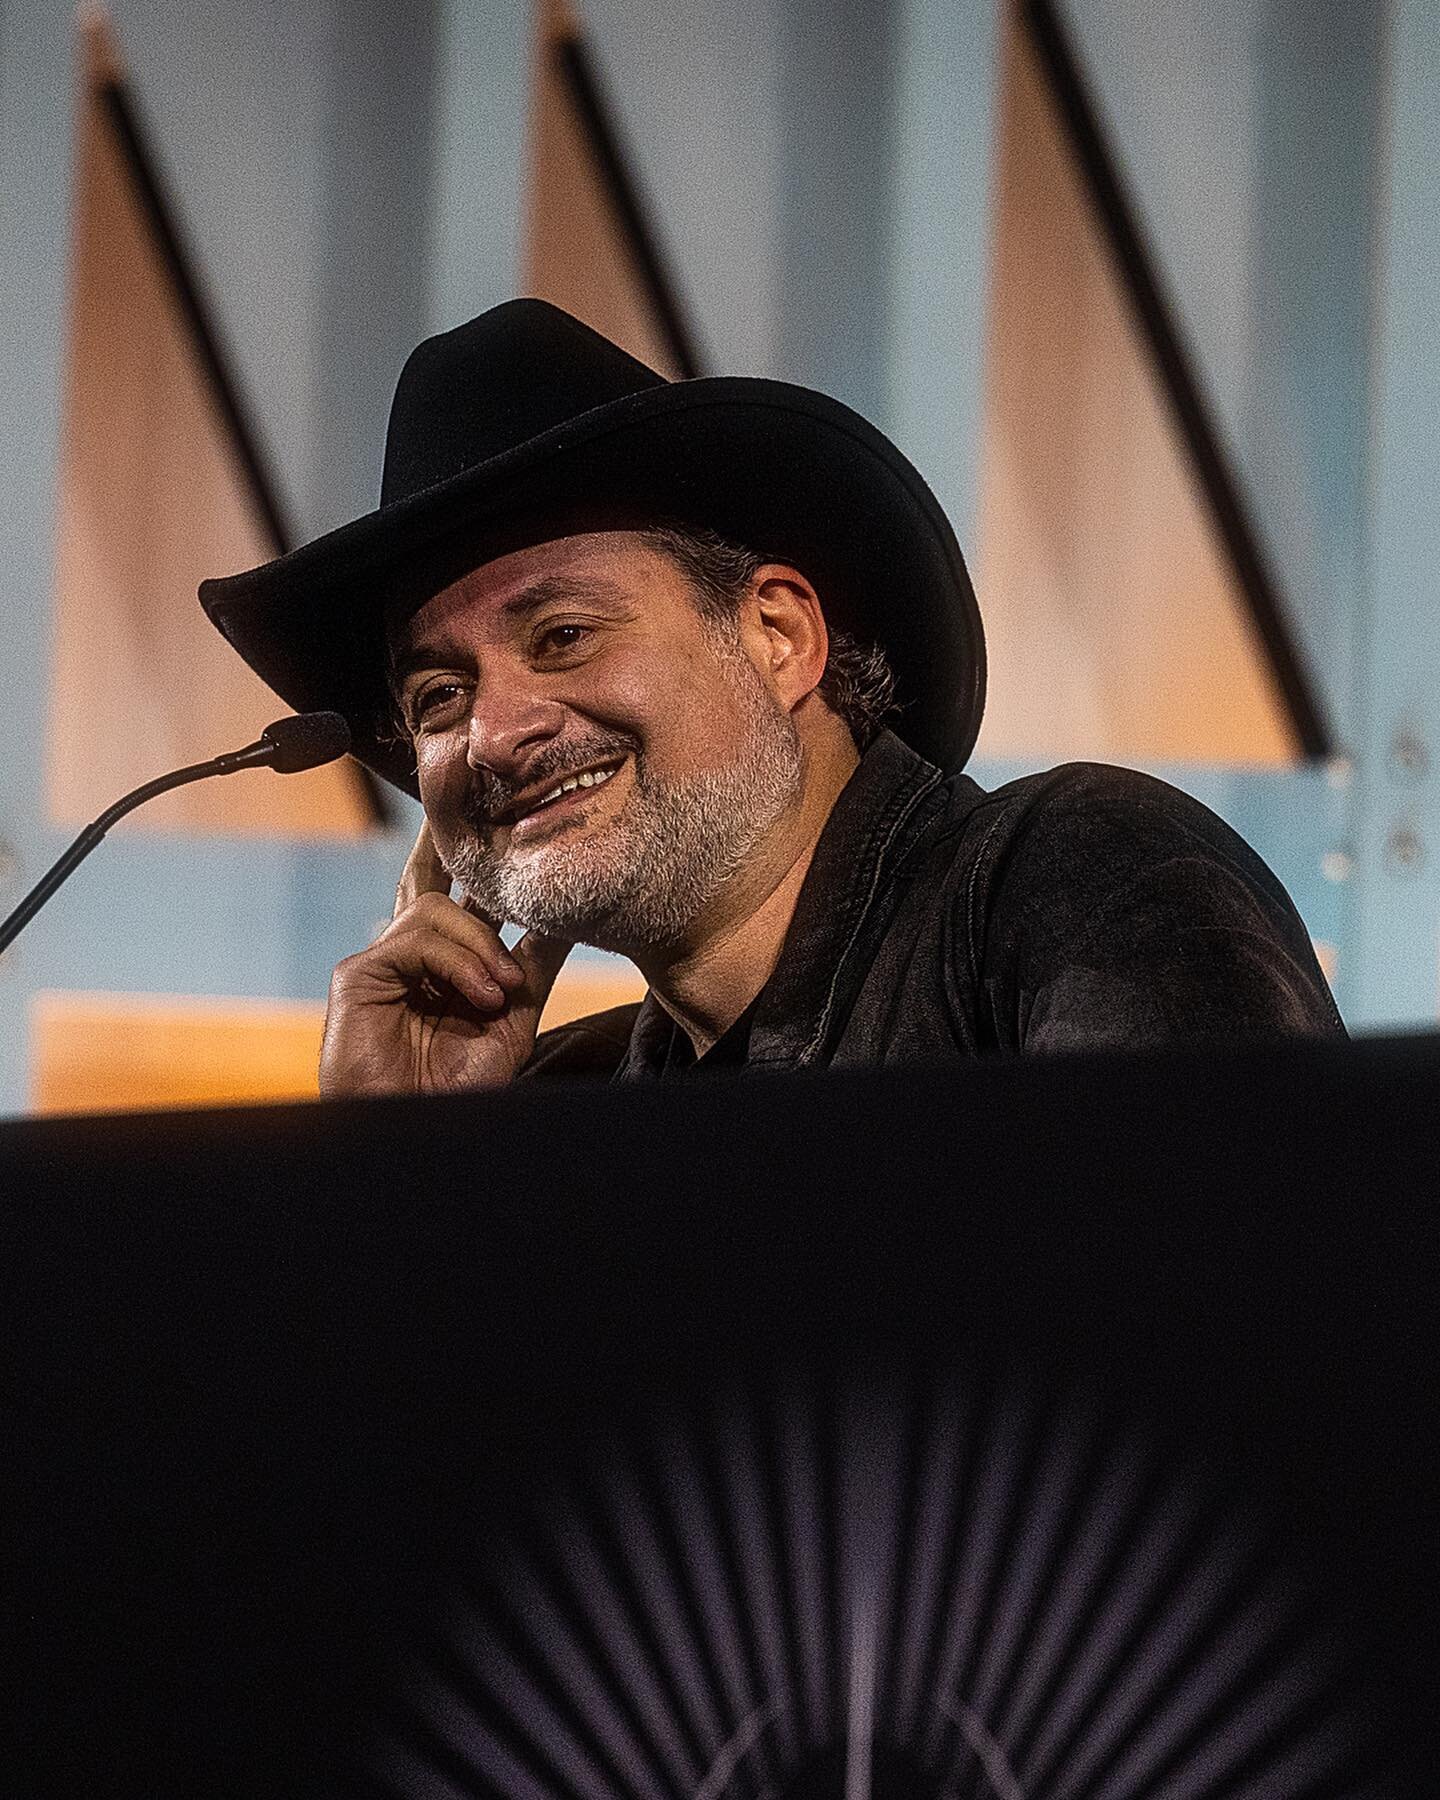 It&rsquo;s my favorite @starwars maker&rsquo;s bday and I just took a bunch of photos of him. Happy Birthday @dave.filoni 
#starwars #starwarscelebration